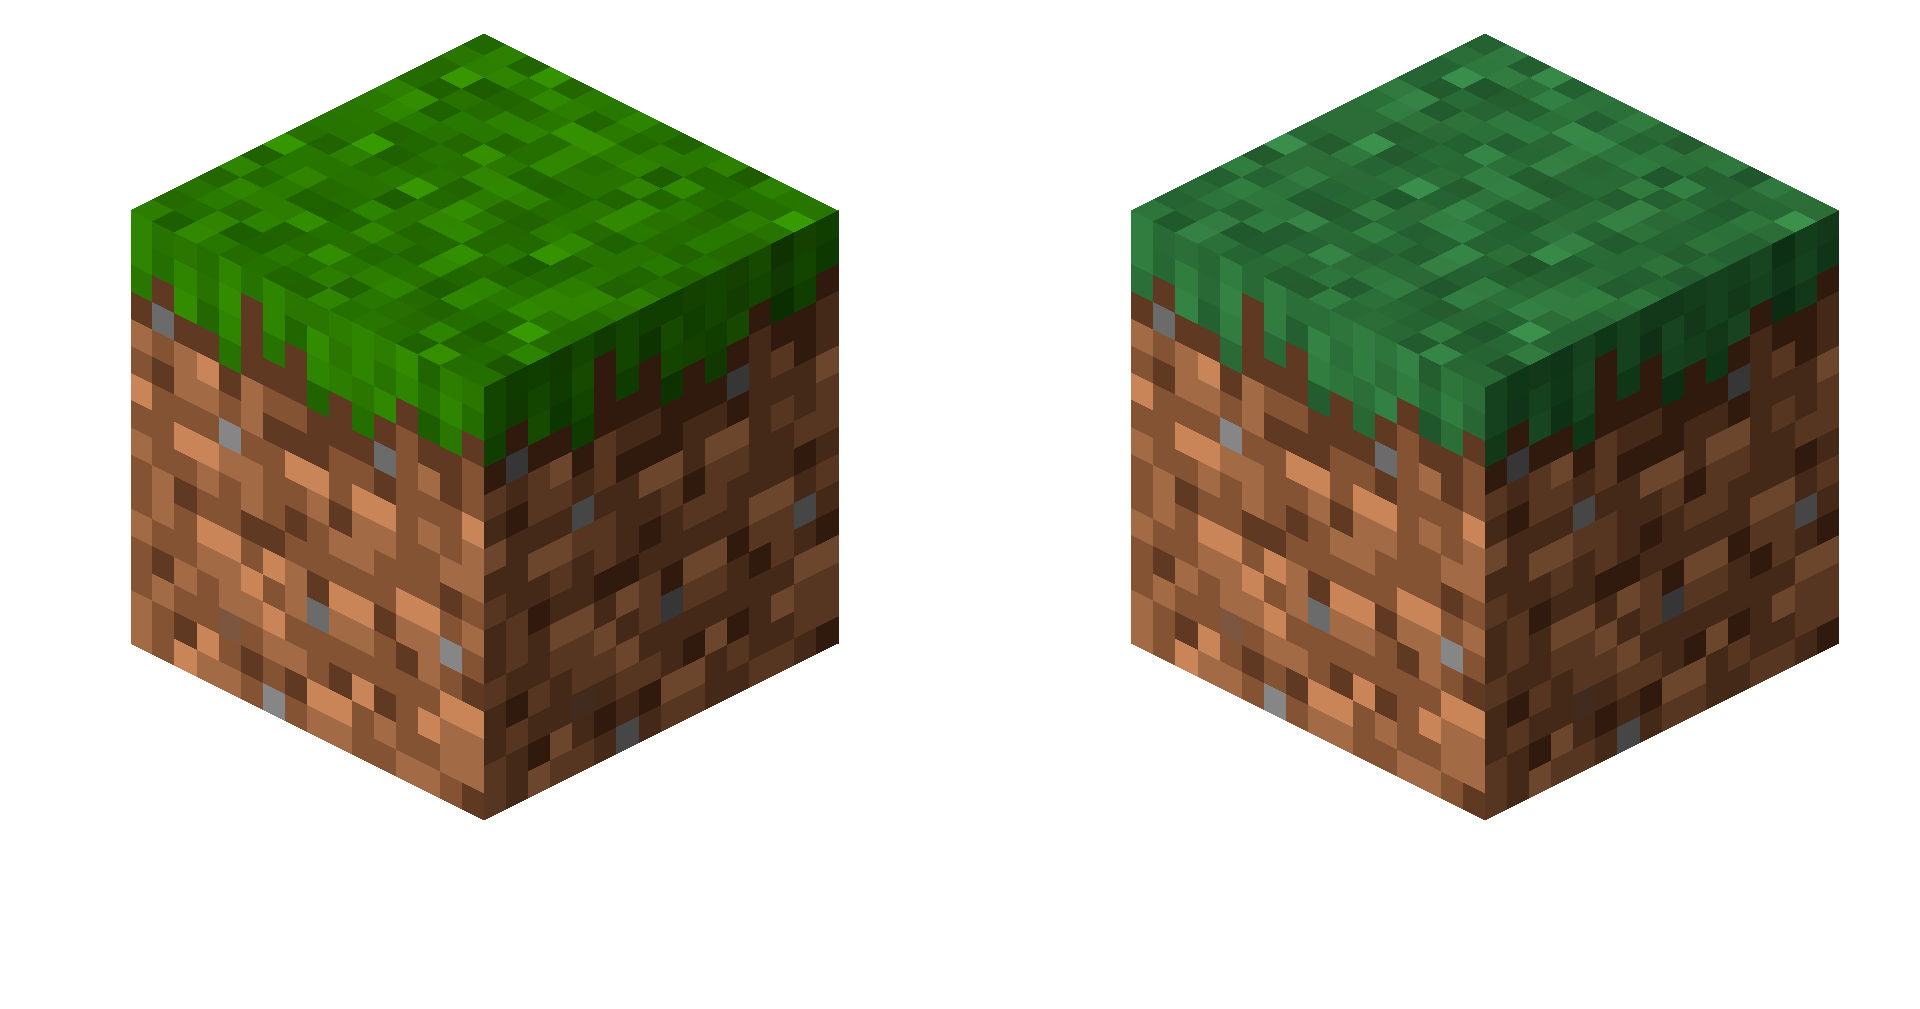 Comparison of grass block with and without pack